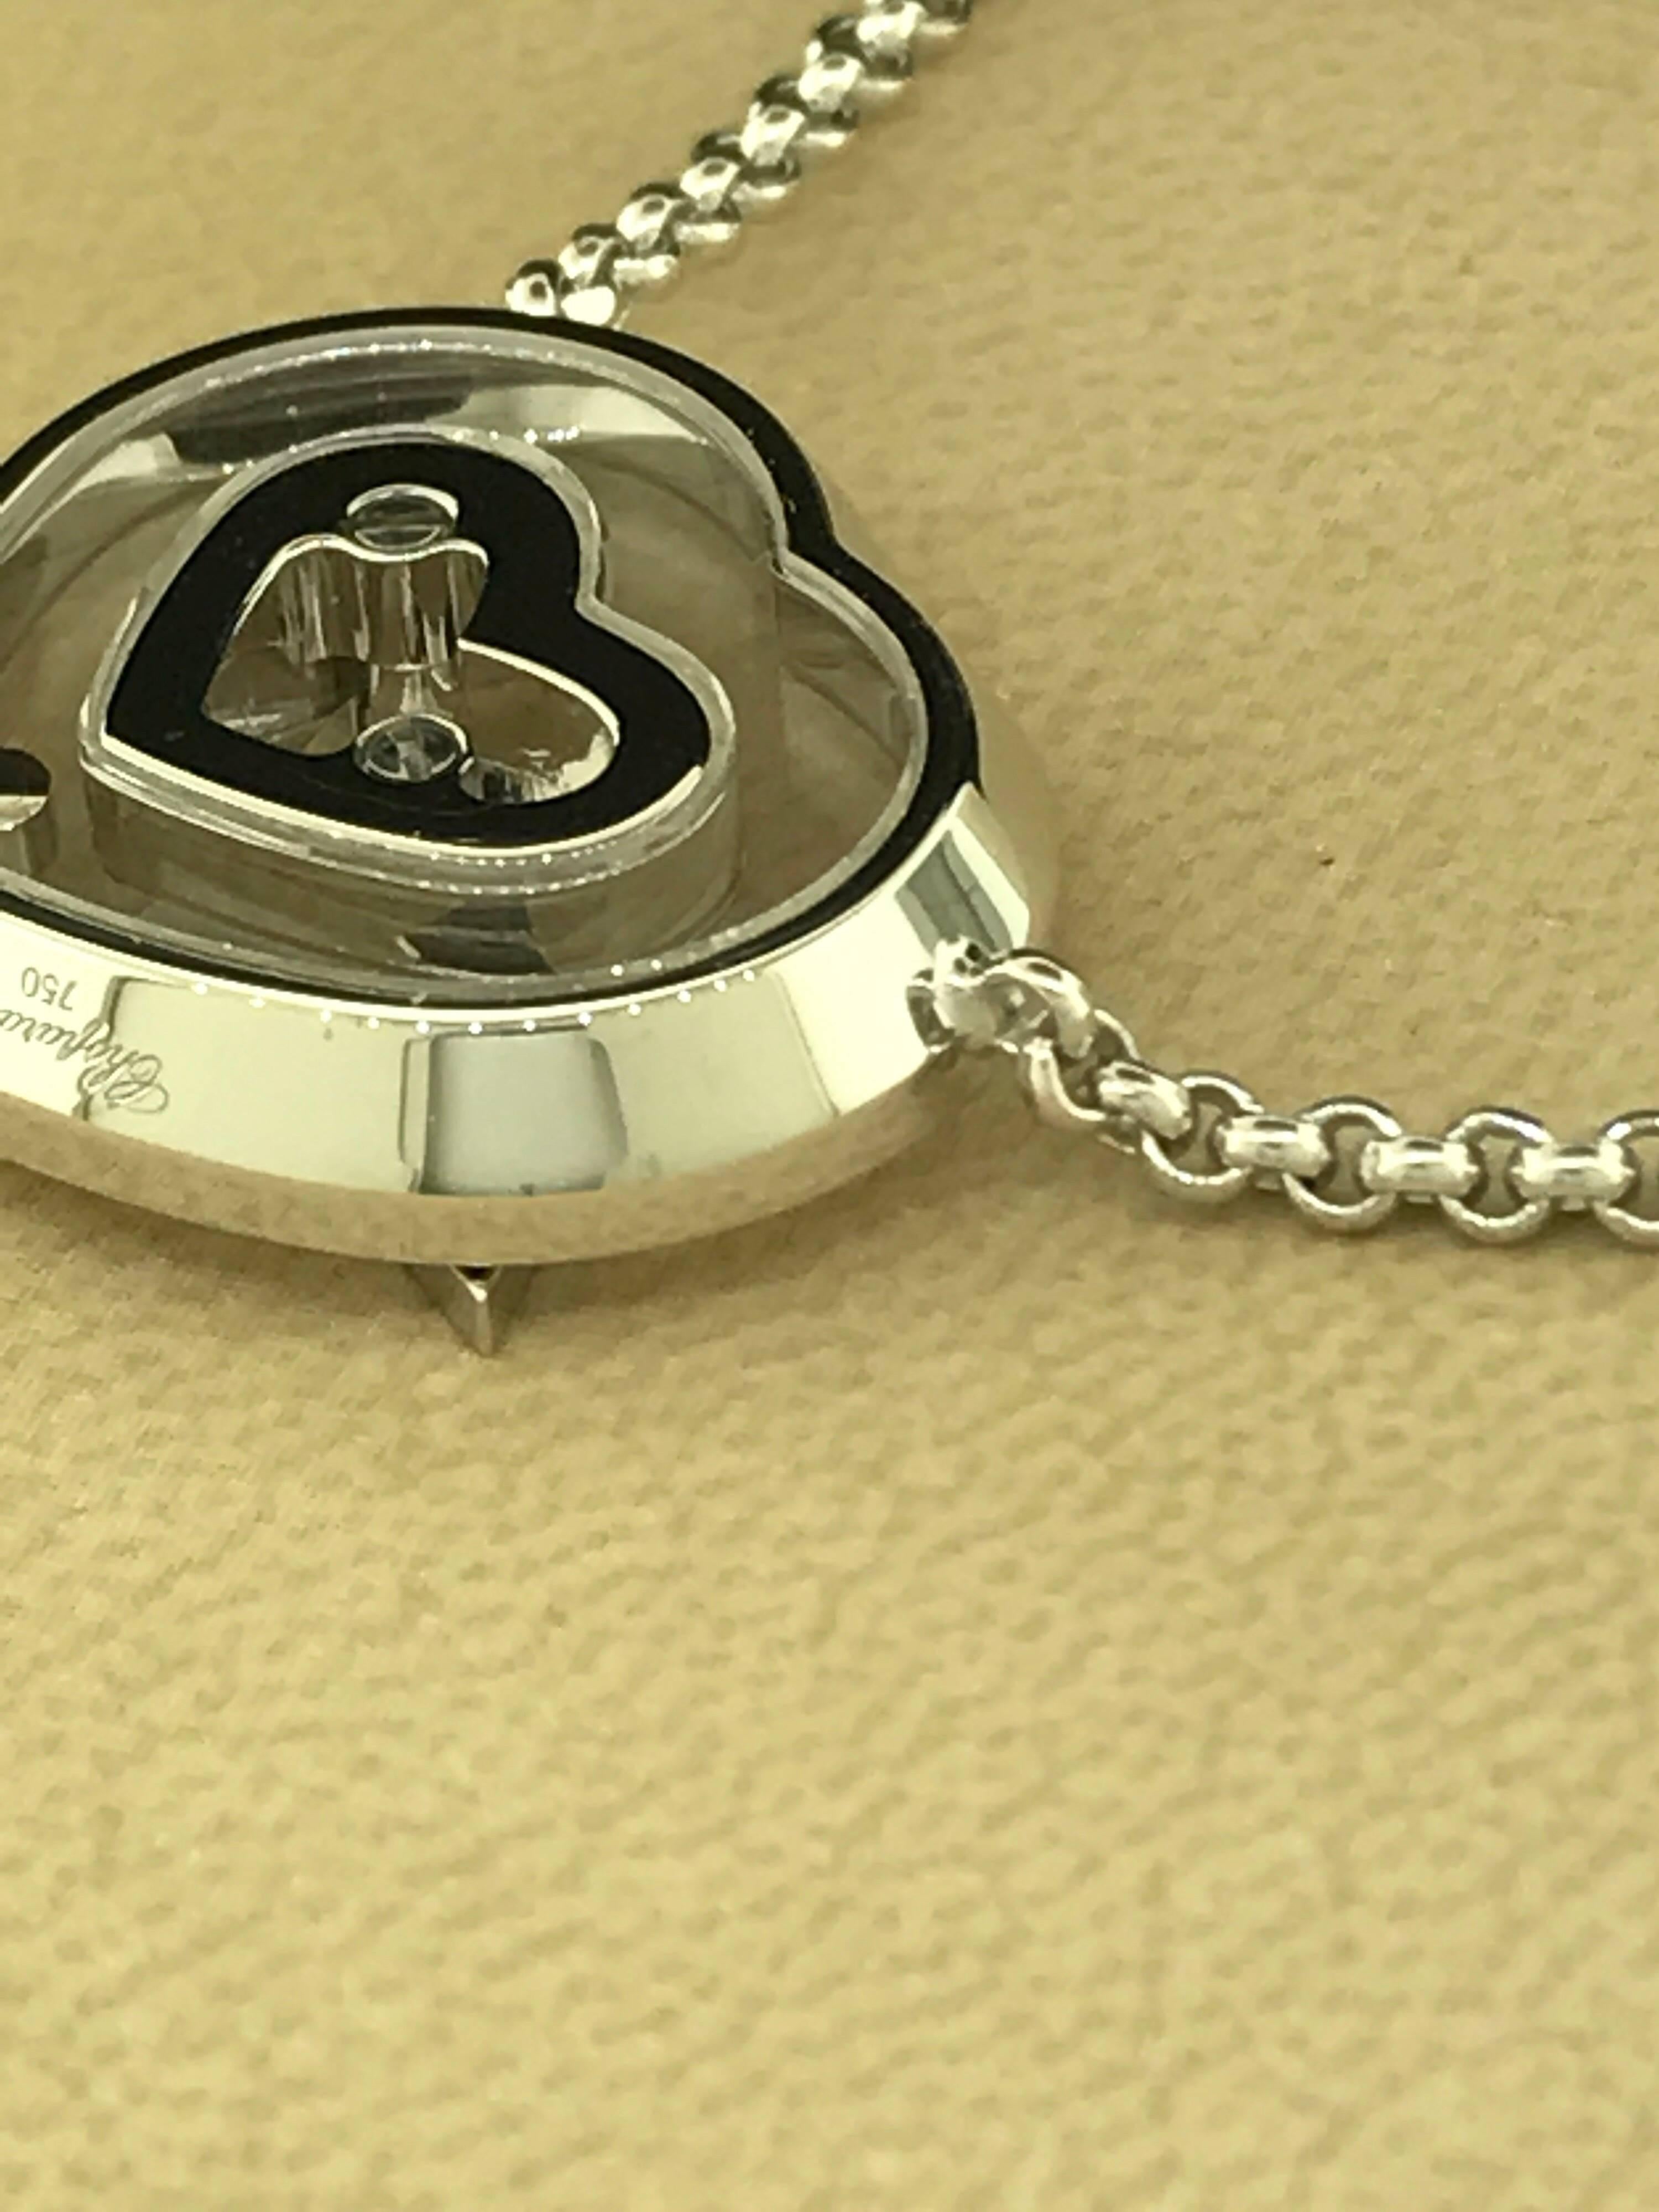 Chopard Happy Diamonds Heart Pendant Necklace

Model Number: 81/6599-1001

100% Authentic

Brand New

Comes with original Chopard box, certificate of authenticity and warranty, and jewels manual

18 Karat White Gold 18.10gr

1 Floating Diamond in